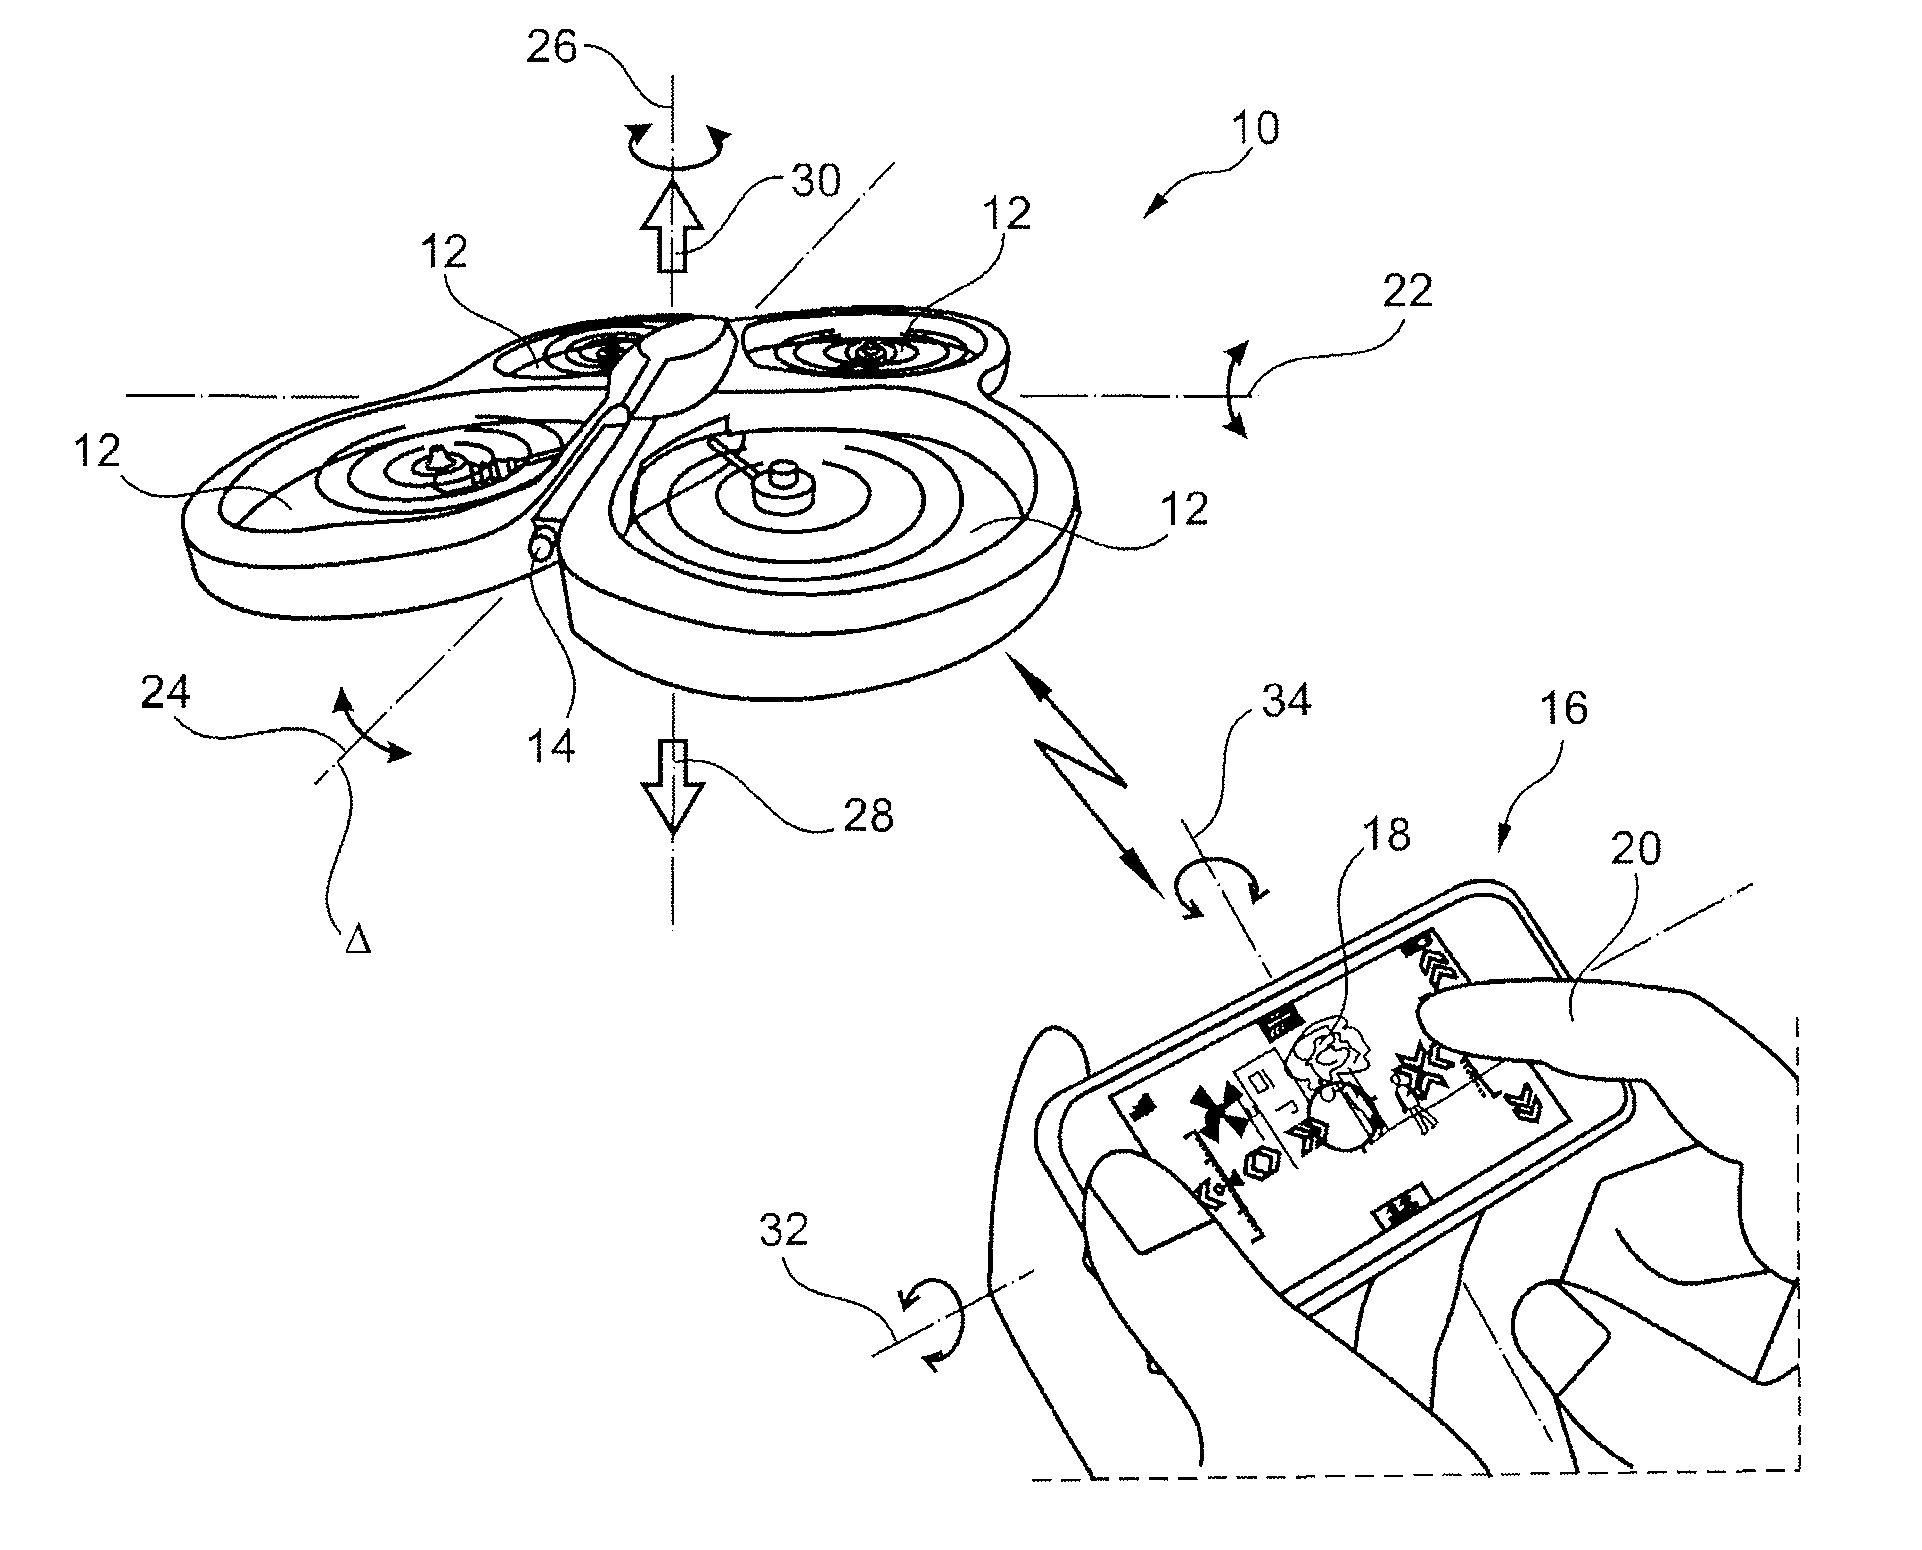 Method of piloting a multiple rotor rotary-wing drone to follow a curvilinear turn